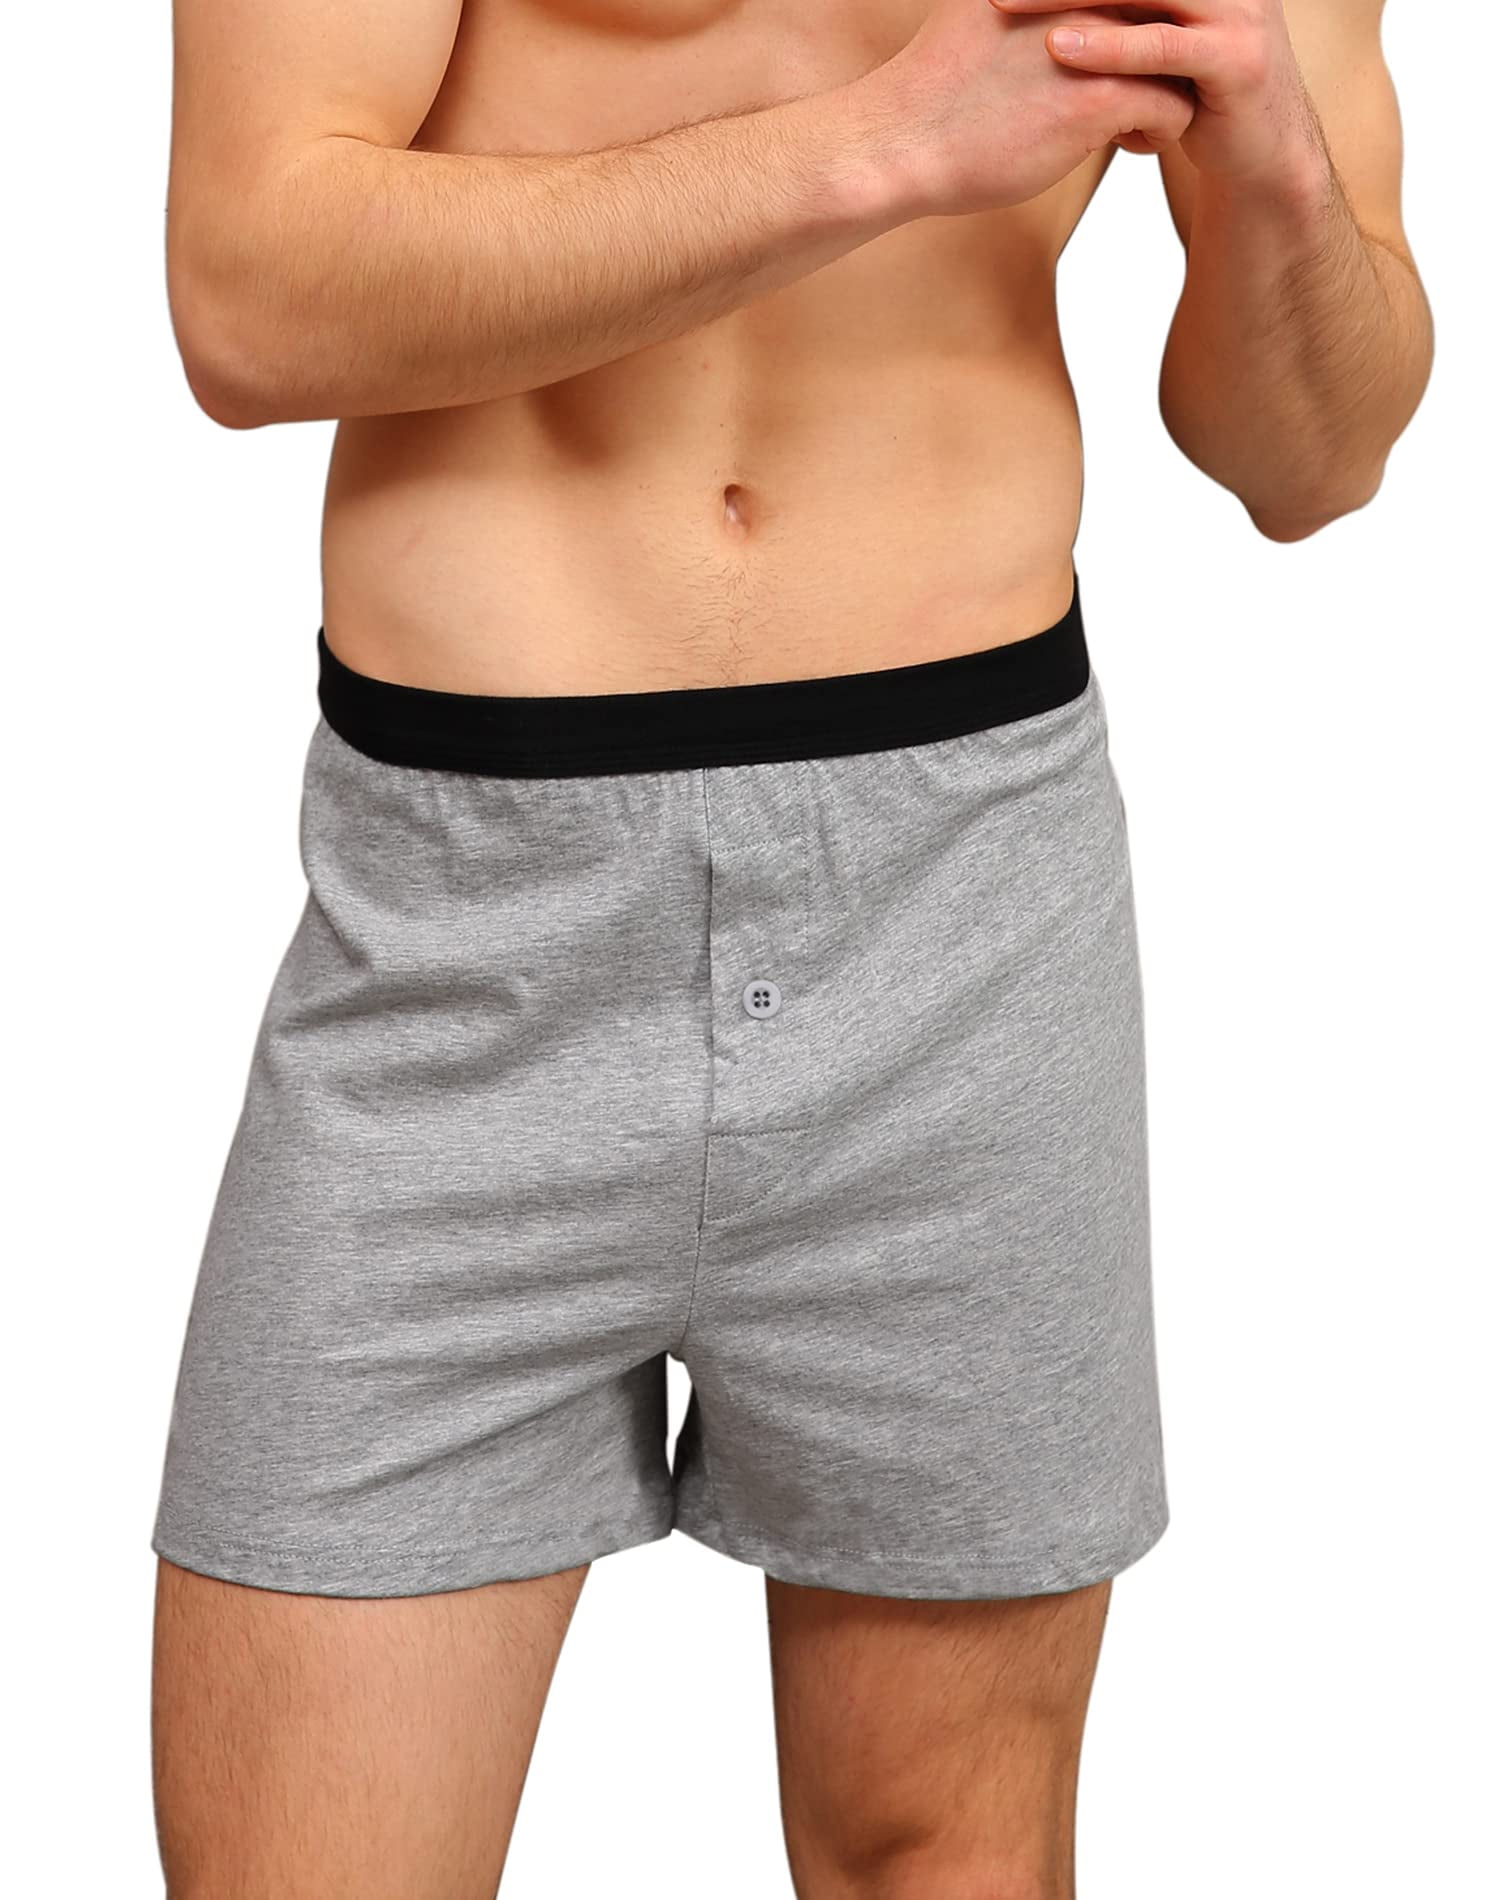 INNERSY Men's Boxers Cotton Knit Shorts Black Boxers for Men with Stretchy  Waistband 4-Pack(Black, L) 